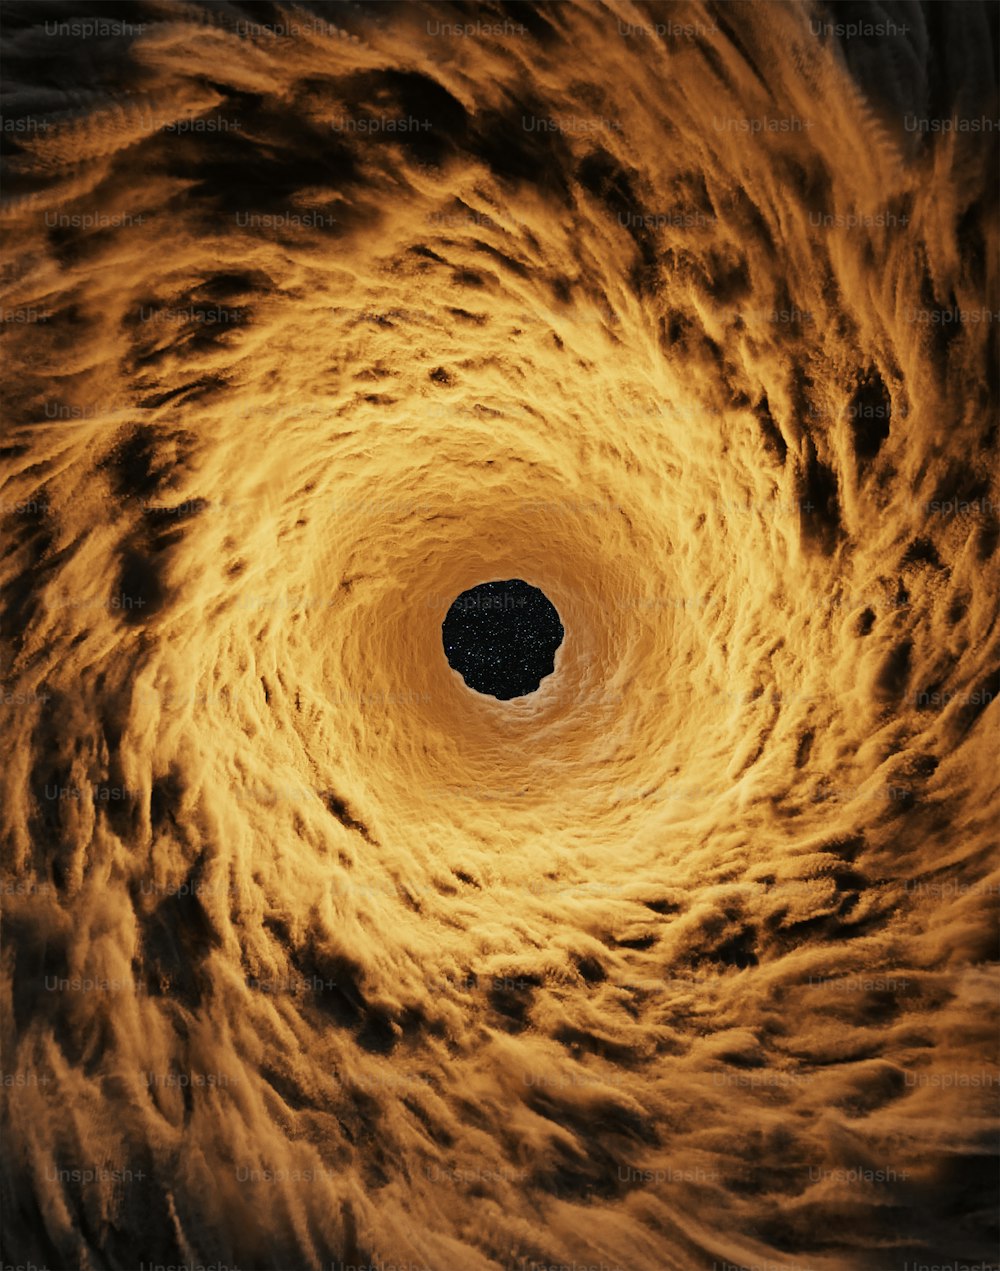 a black hole in the center of a yellow swirl